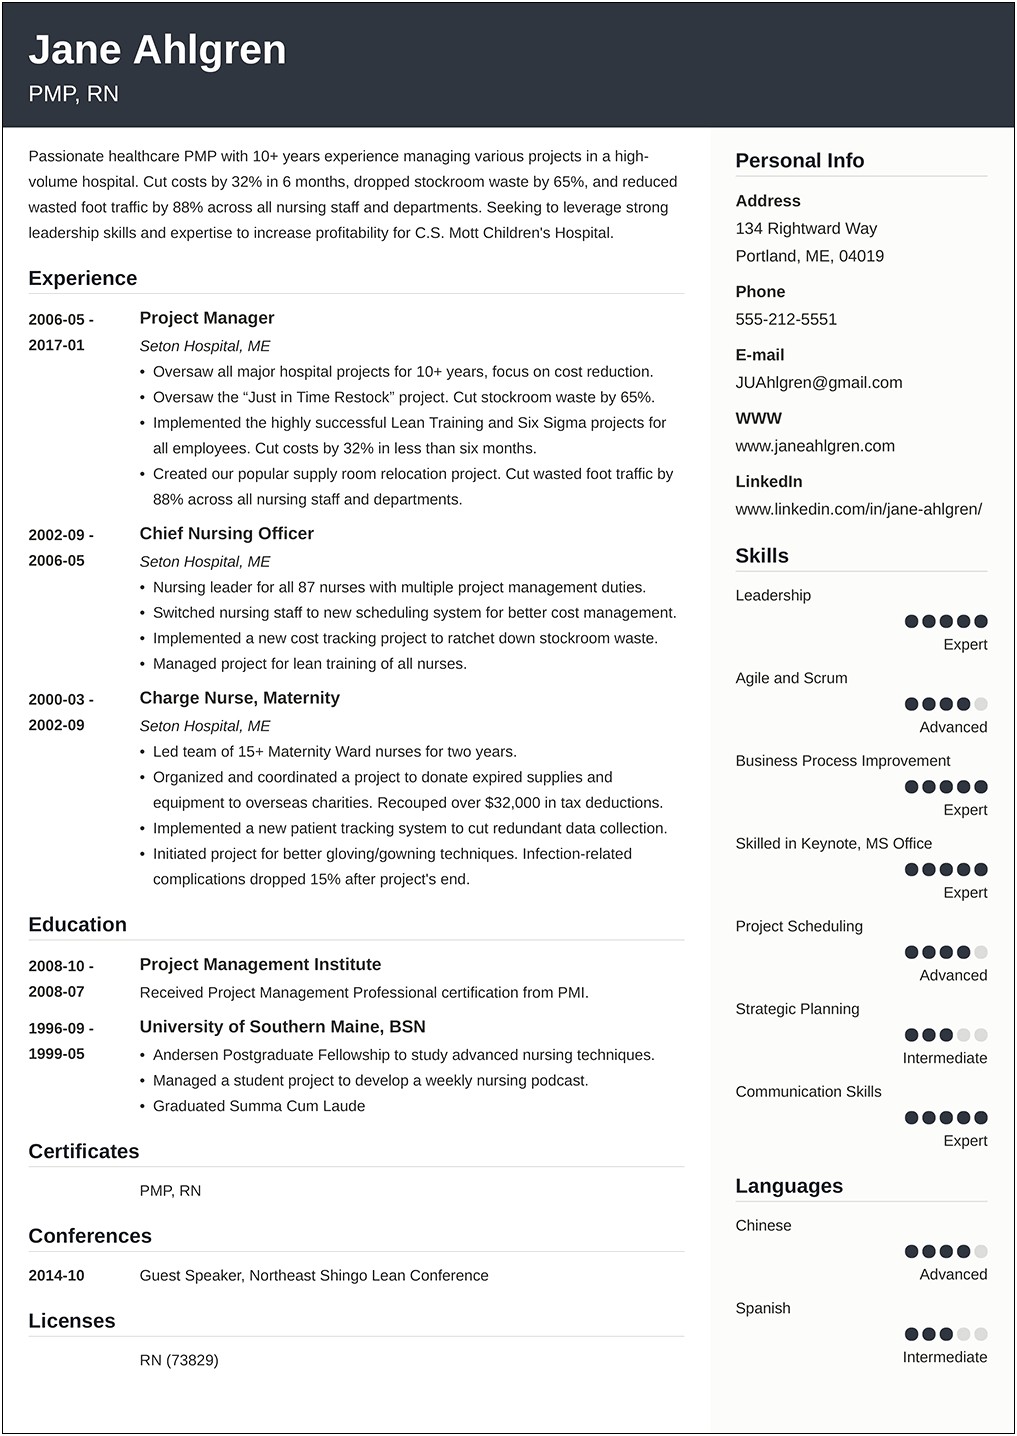 Resume Examples For Lots Of Jobs